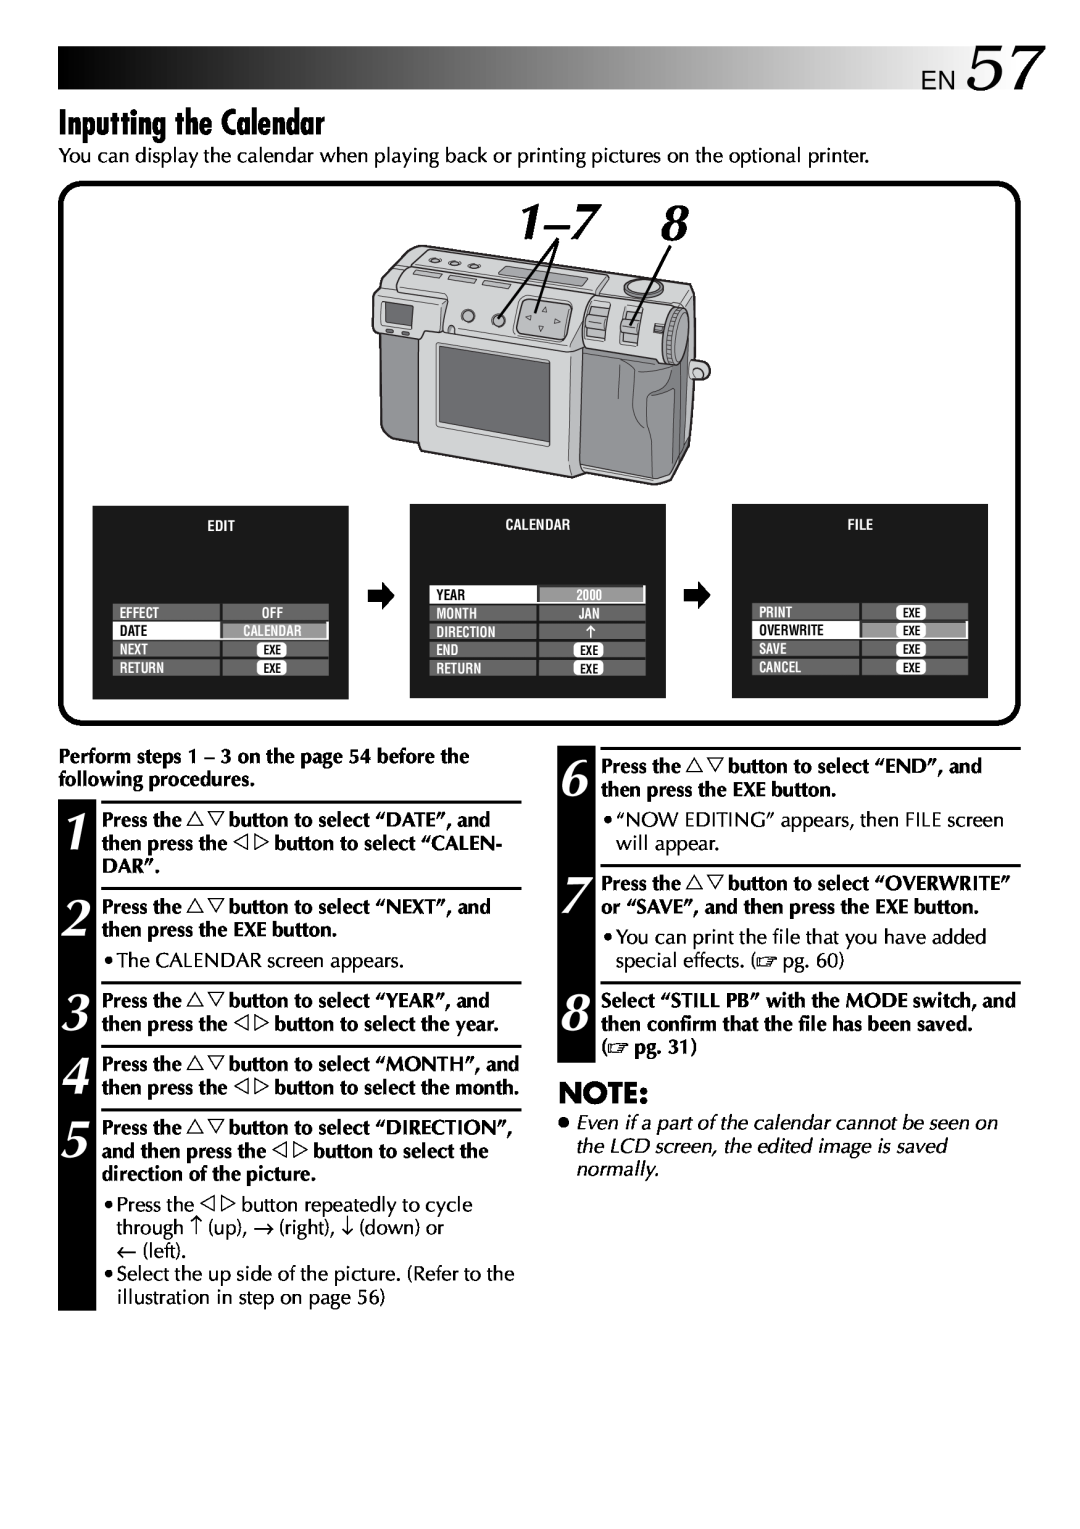 JVC GC-QX3 manual Inputting the Calendar, EN57, Perform steps 1 - 3 on the page 54 before the following procedures, Dar” 